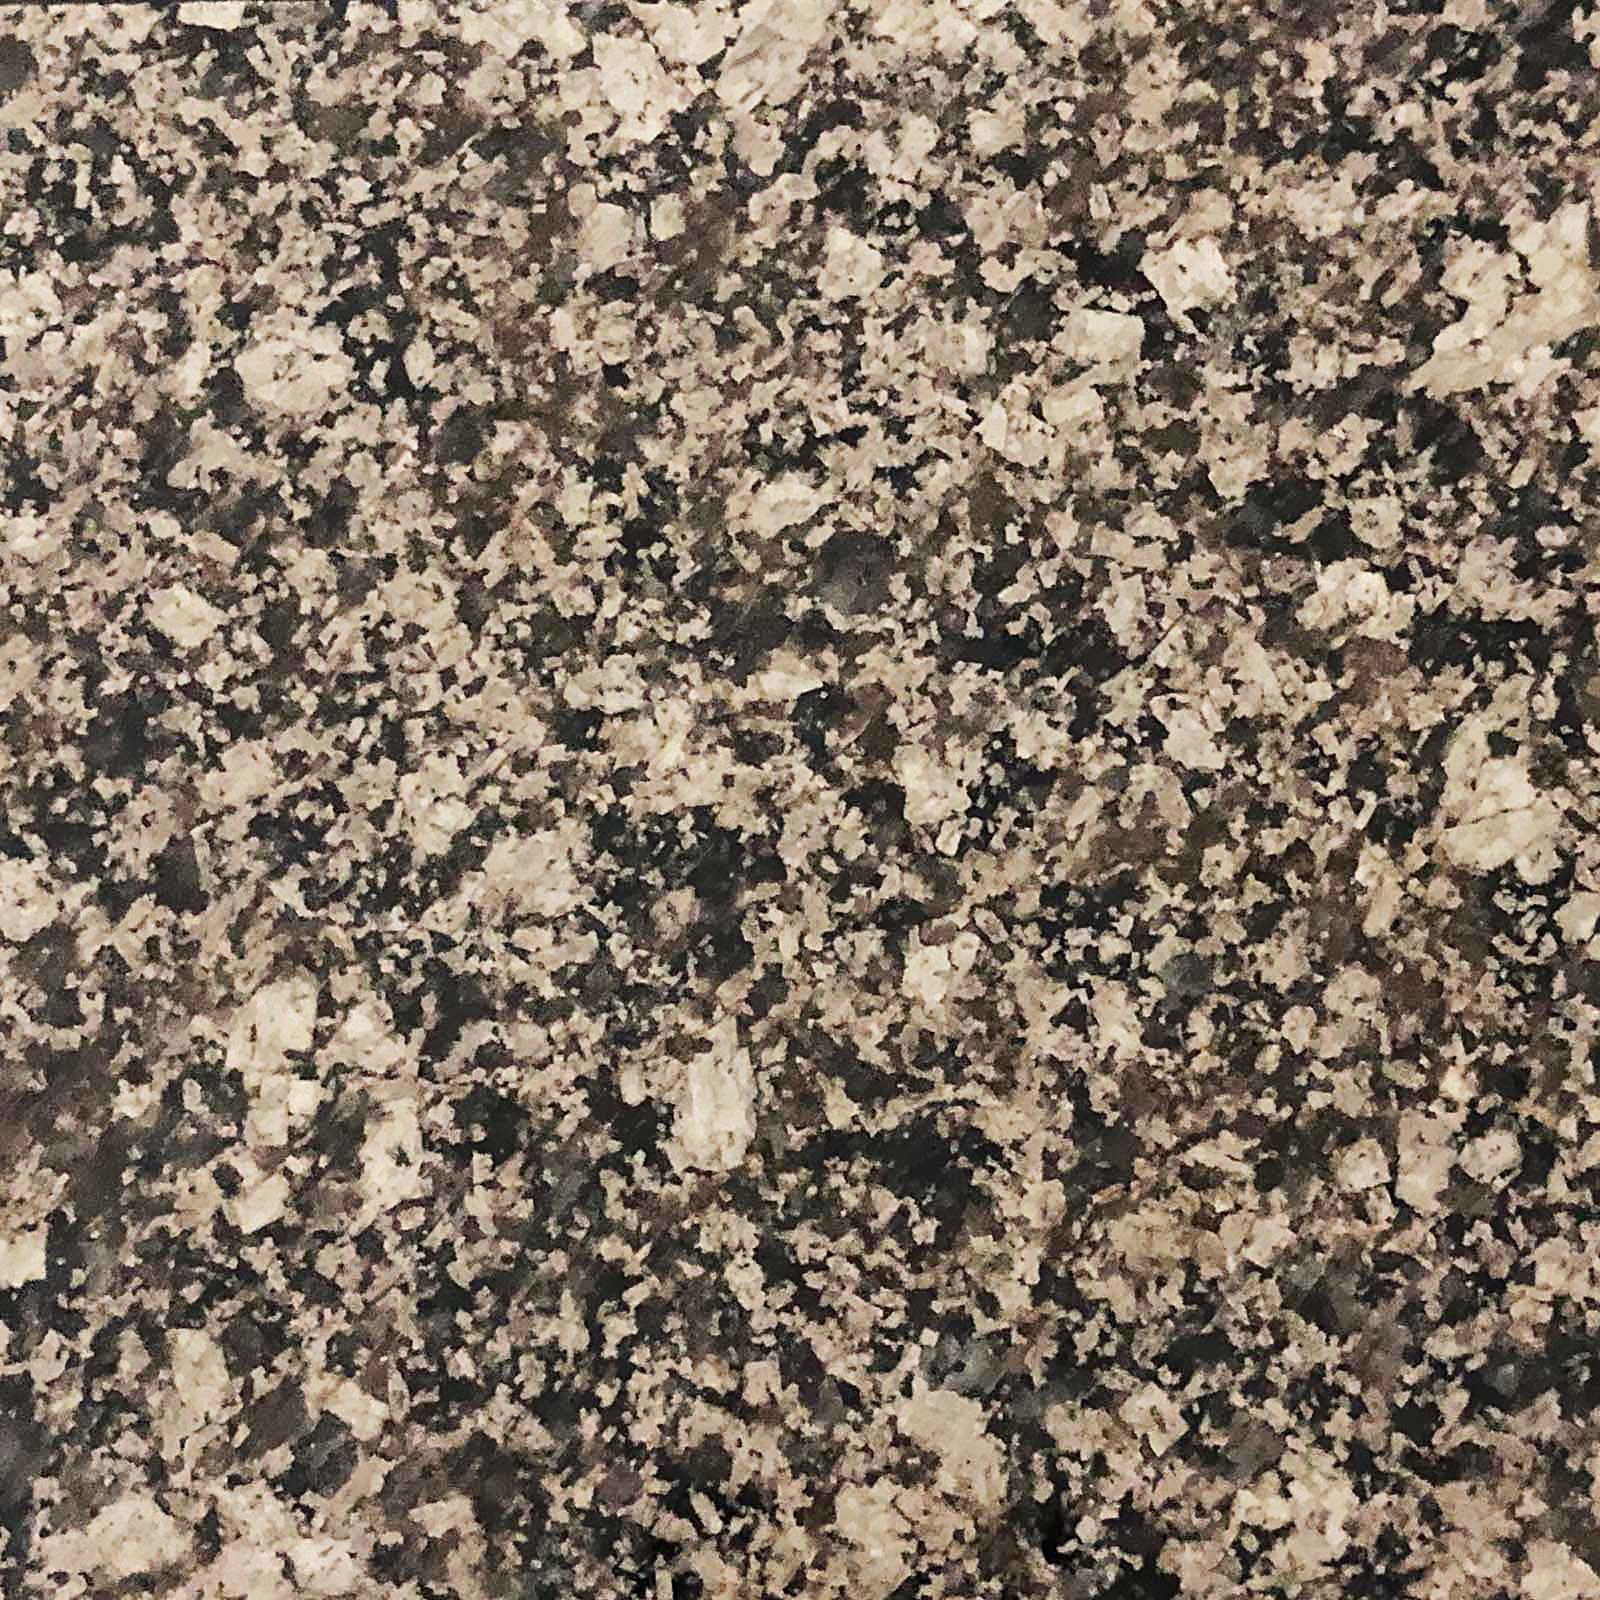 Desert brown granite from a qualified Indian granite supplier